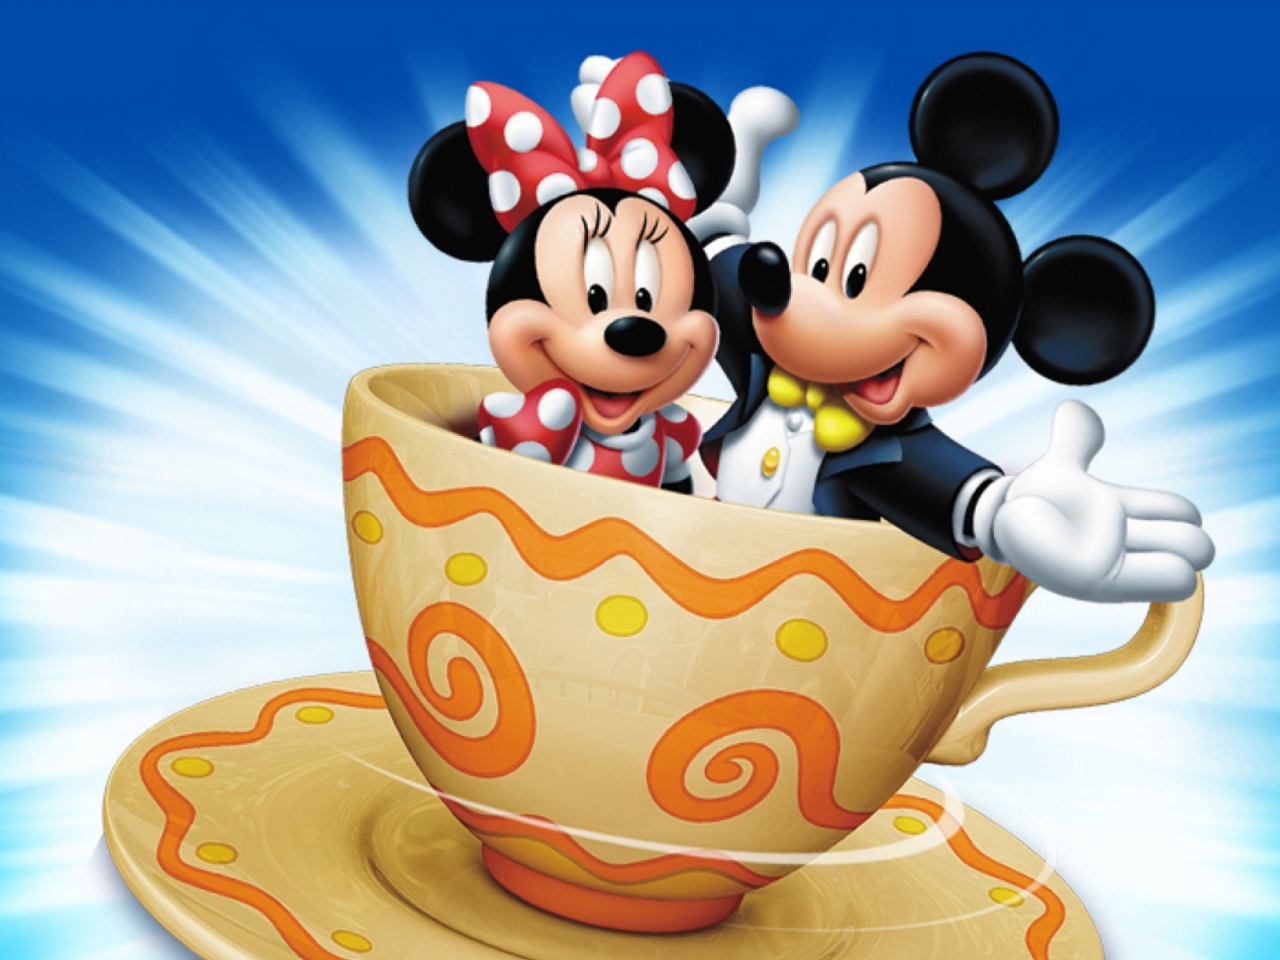 Mickey And Minnie Mouse In Cup wallpaper 1280x960